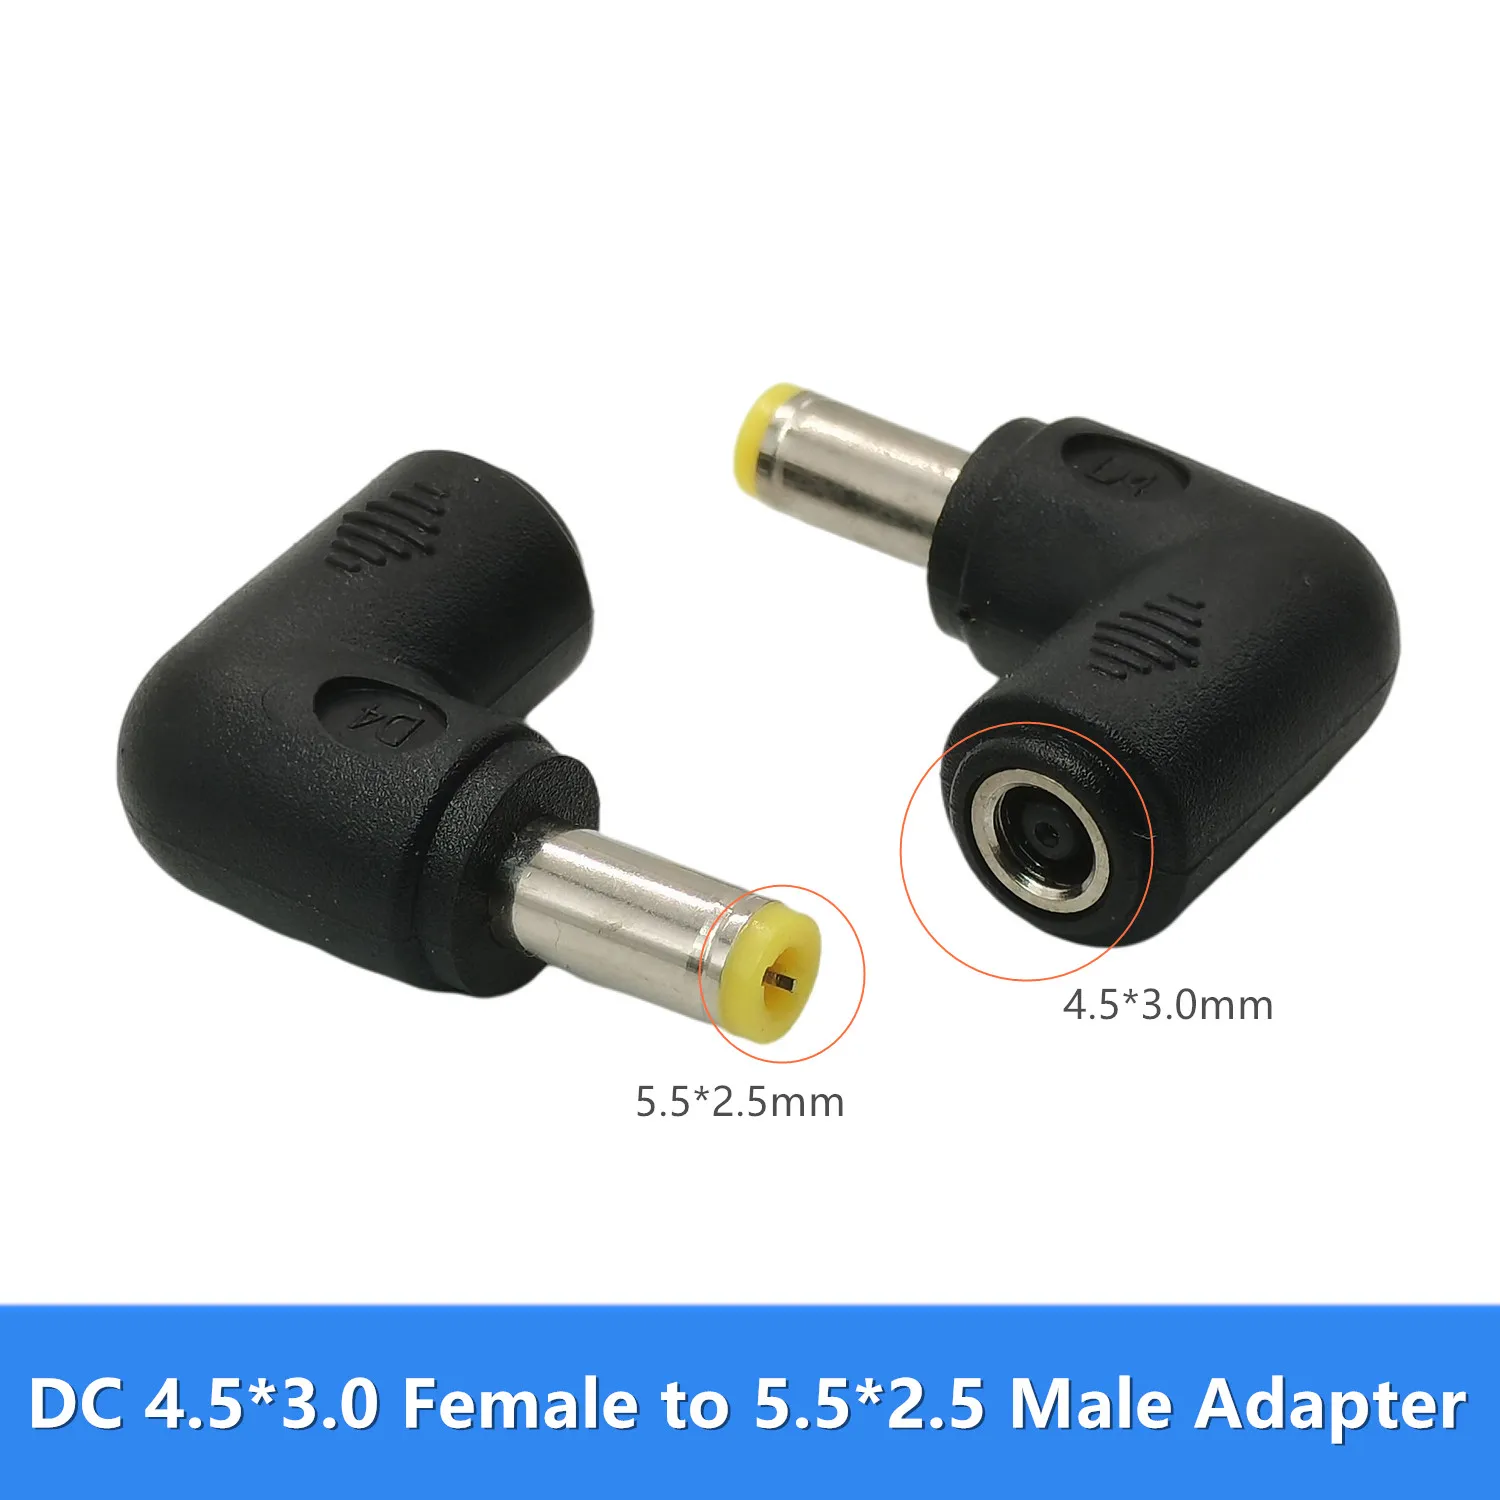 

1PCS 90 DEGREE ADAPTER JACK 4.5*3.0mm FEMALE TO DC 5.5*2.5mm MALE CONVERTER RIGHT ANGLE CONNECTOR